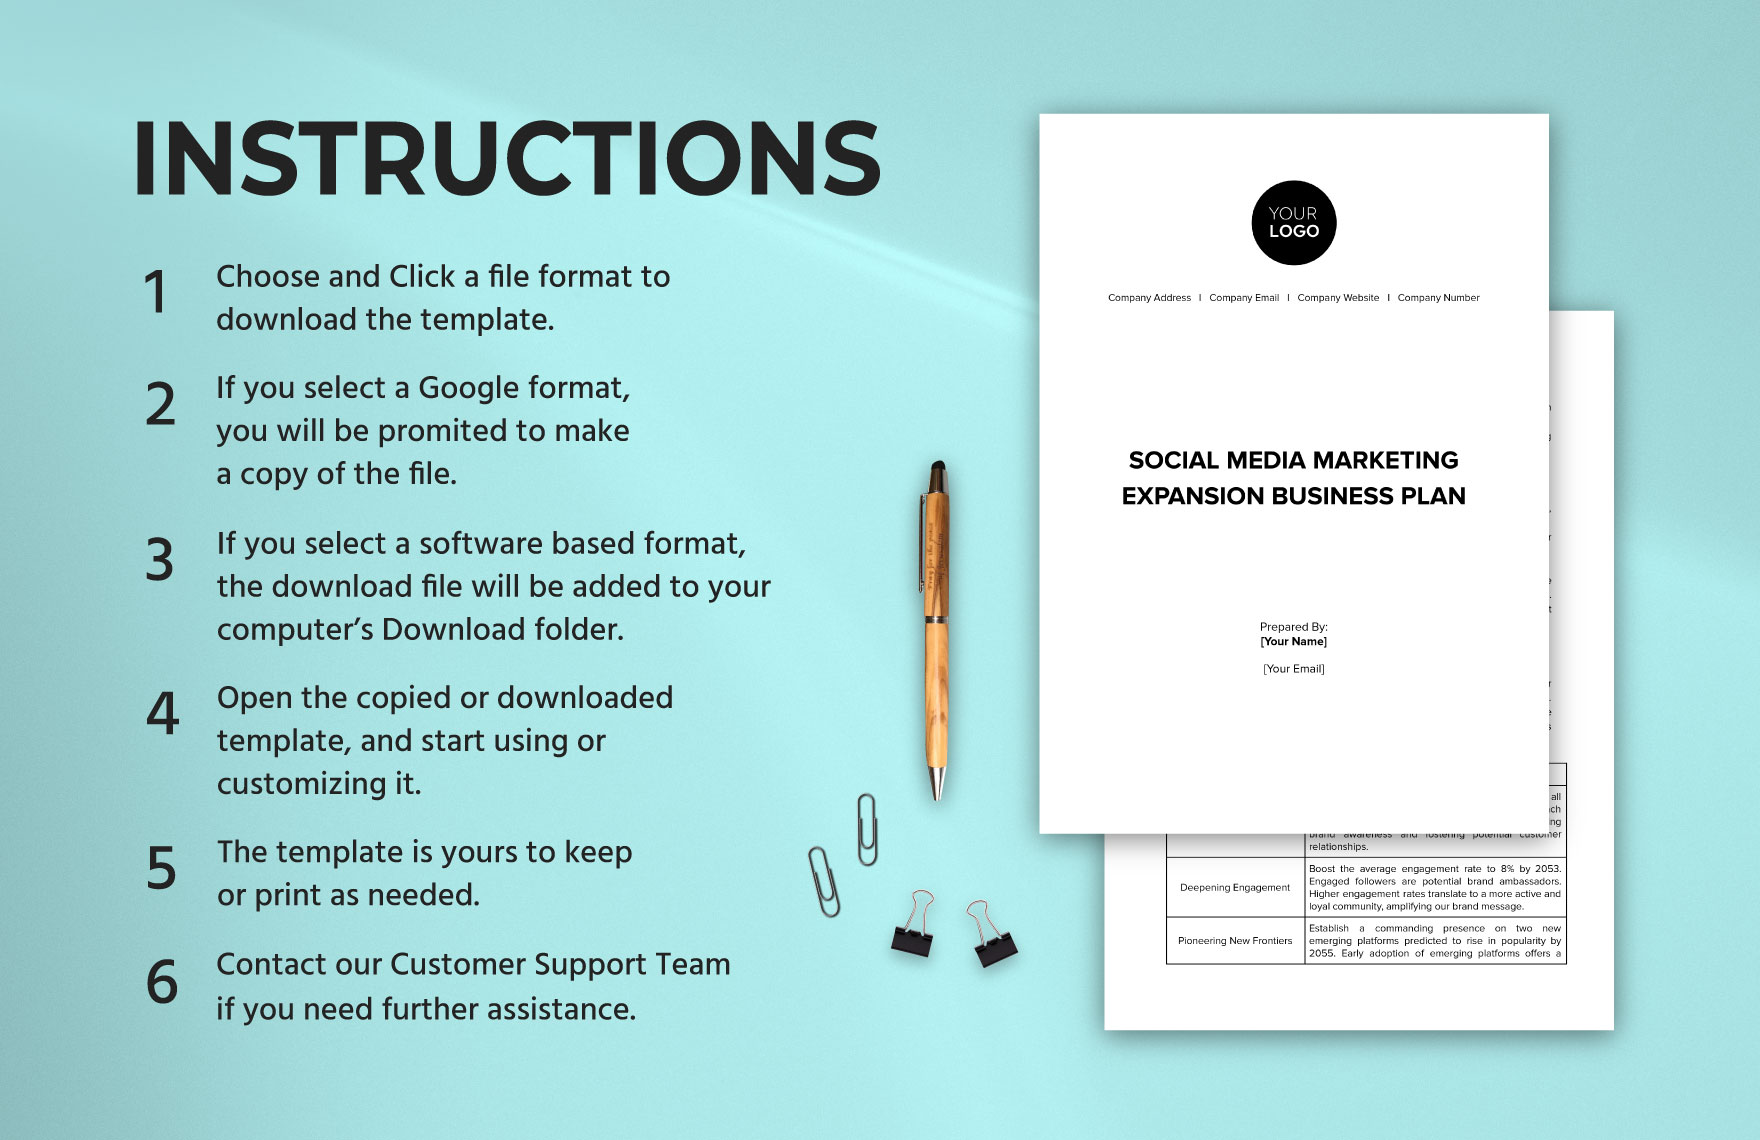 Social Media Marketing Expansion Business Plan Template